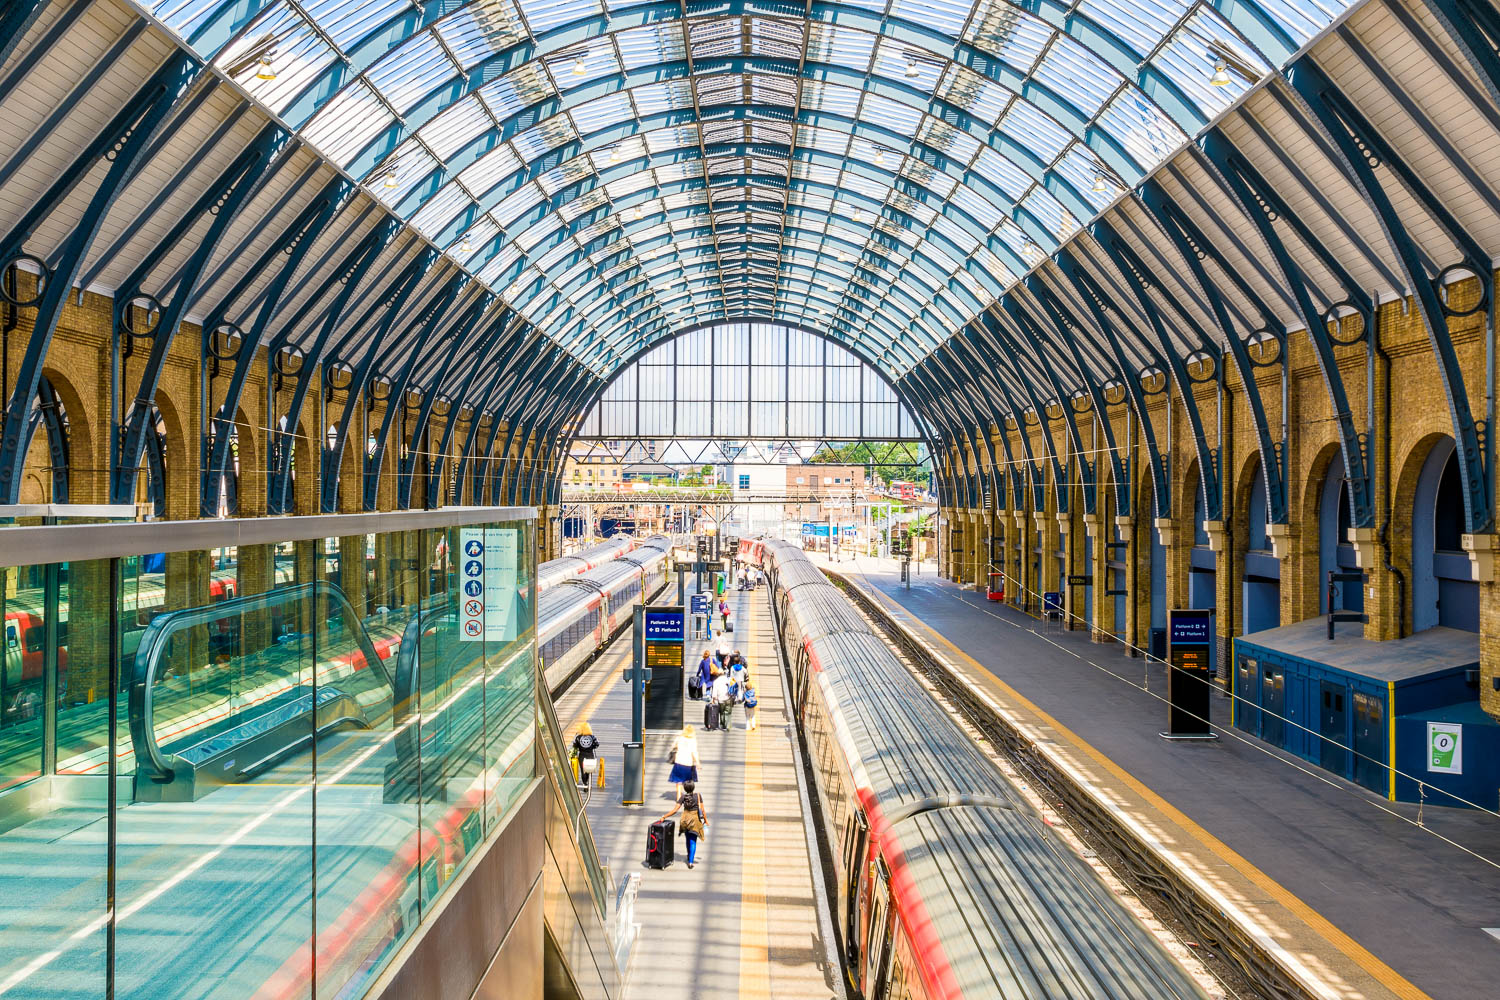 View of platforms at Kings Cross station in London, looking down at the trains under the curved glass roof - my top day trips from London with kids, all of which can be done by train